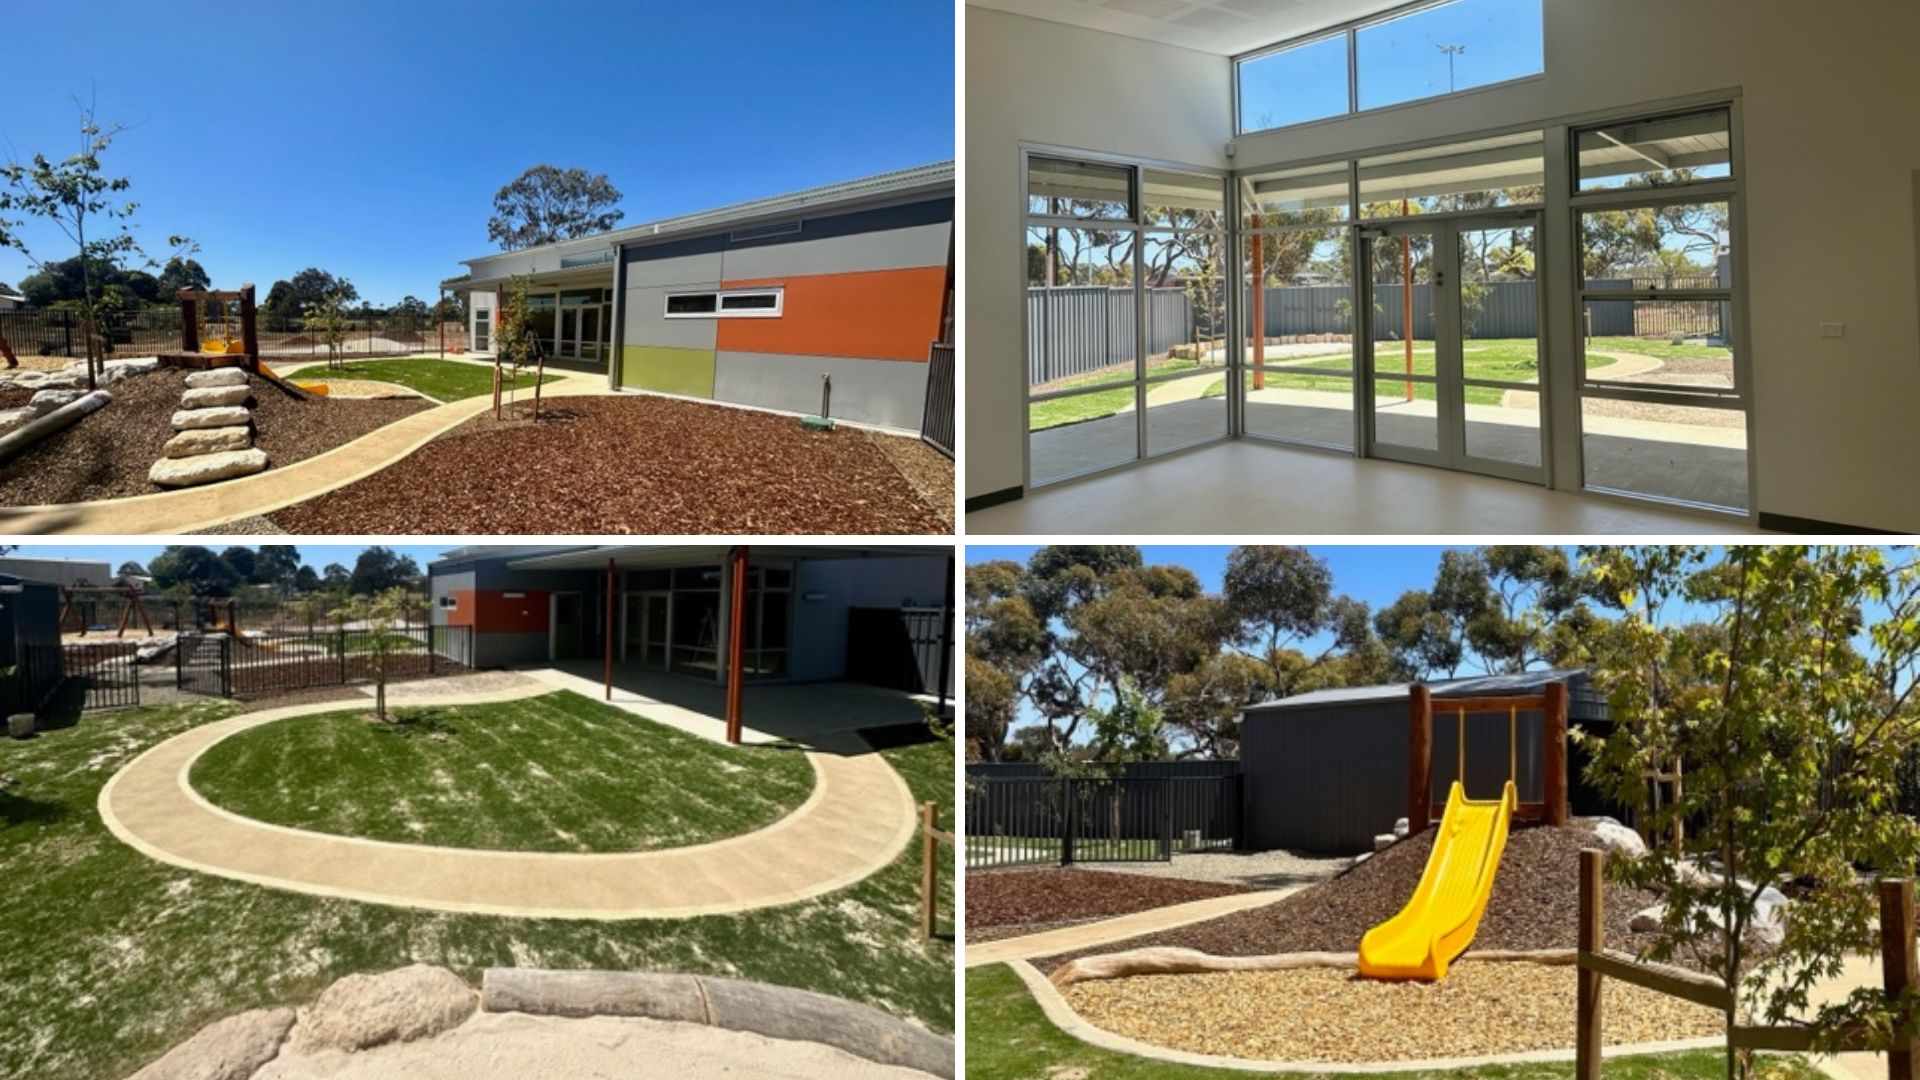 Four photos showing the new childcare centre from inside and outside